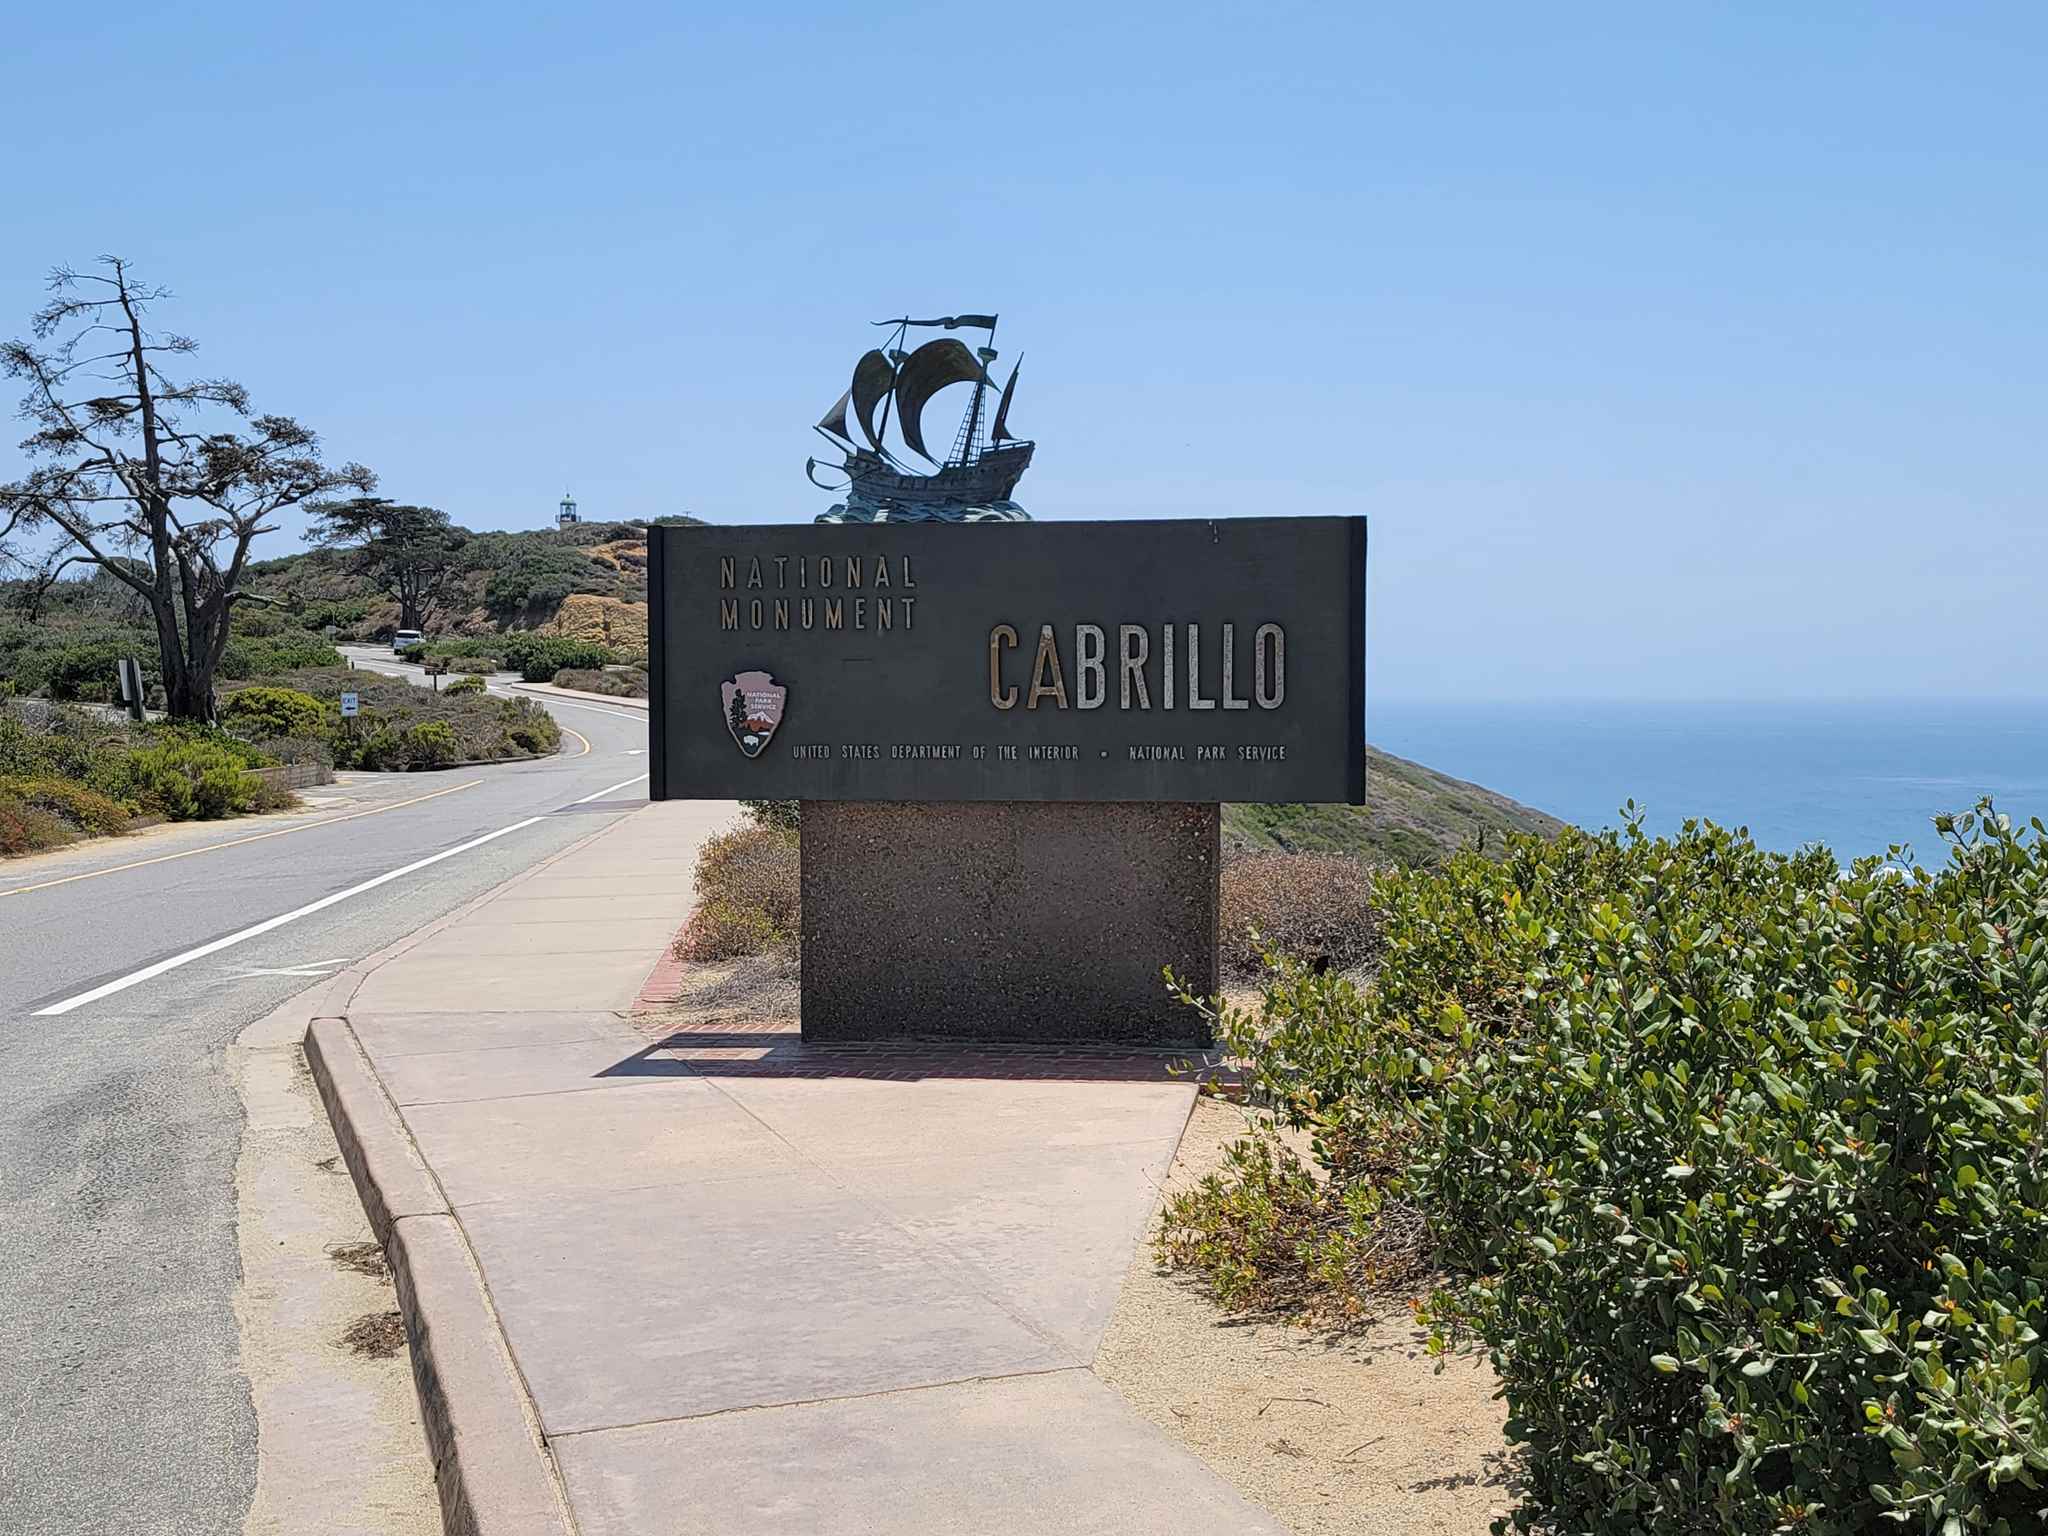 First San Diego stop is Cabrillo National Monument